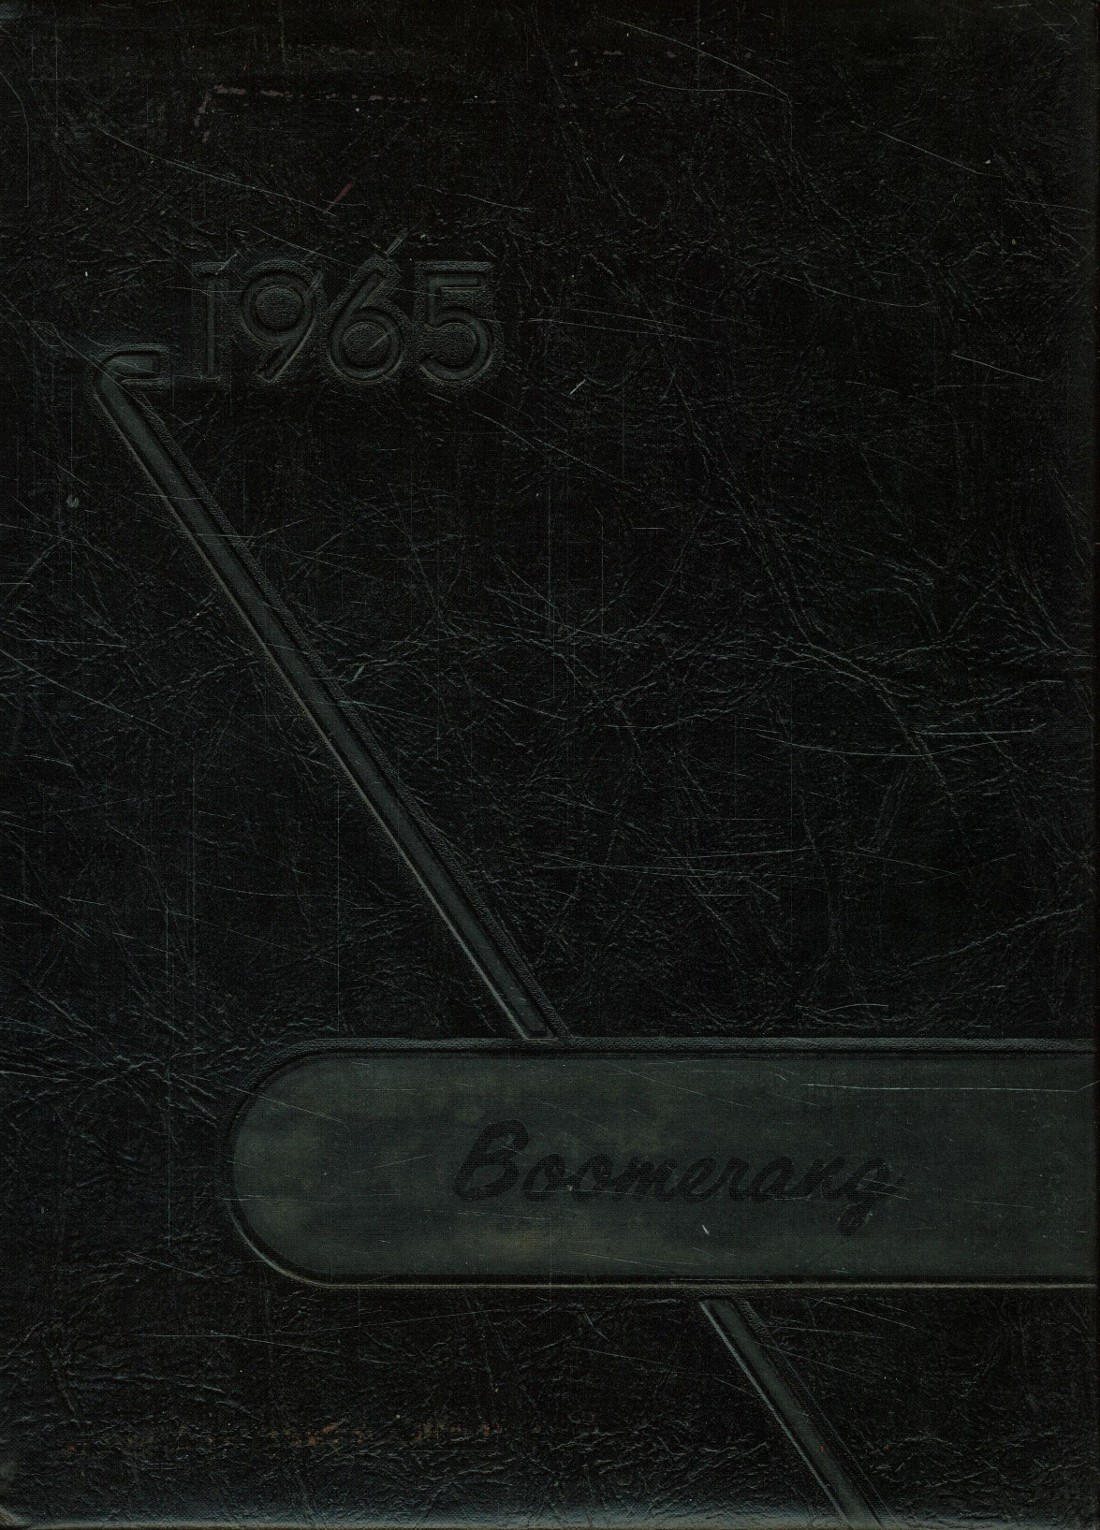 1965-yearbook-from-avon-high-school-from-avon-illinois-for-sale